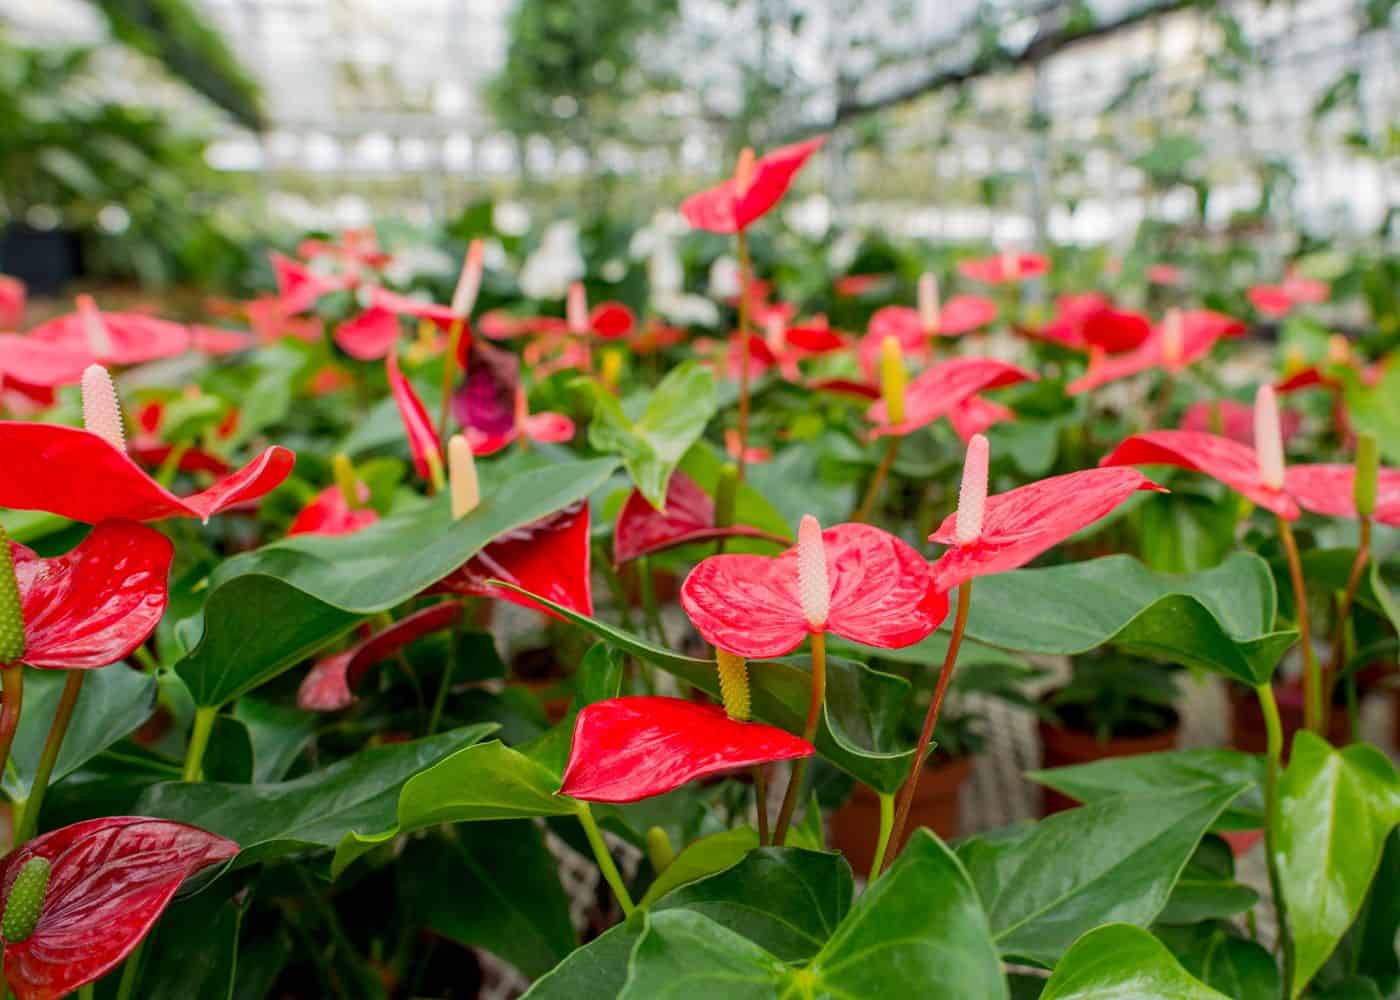 Red peace lilies at the garden center (anthurium)